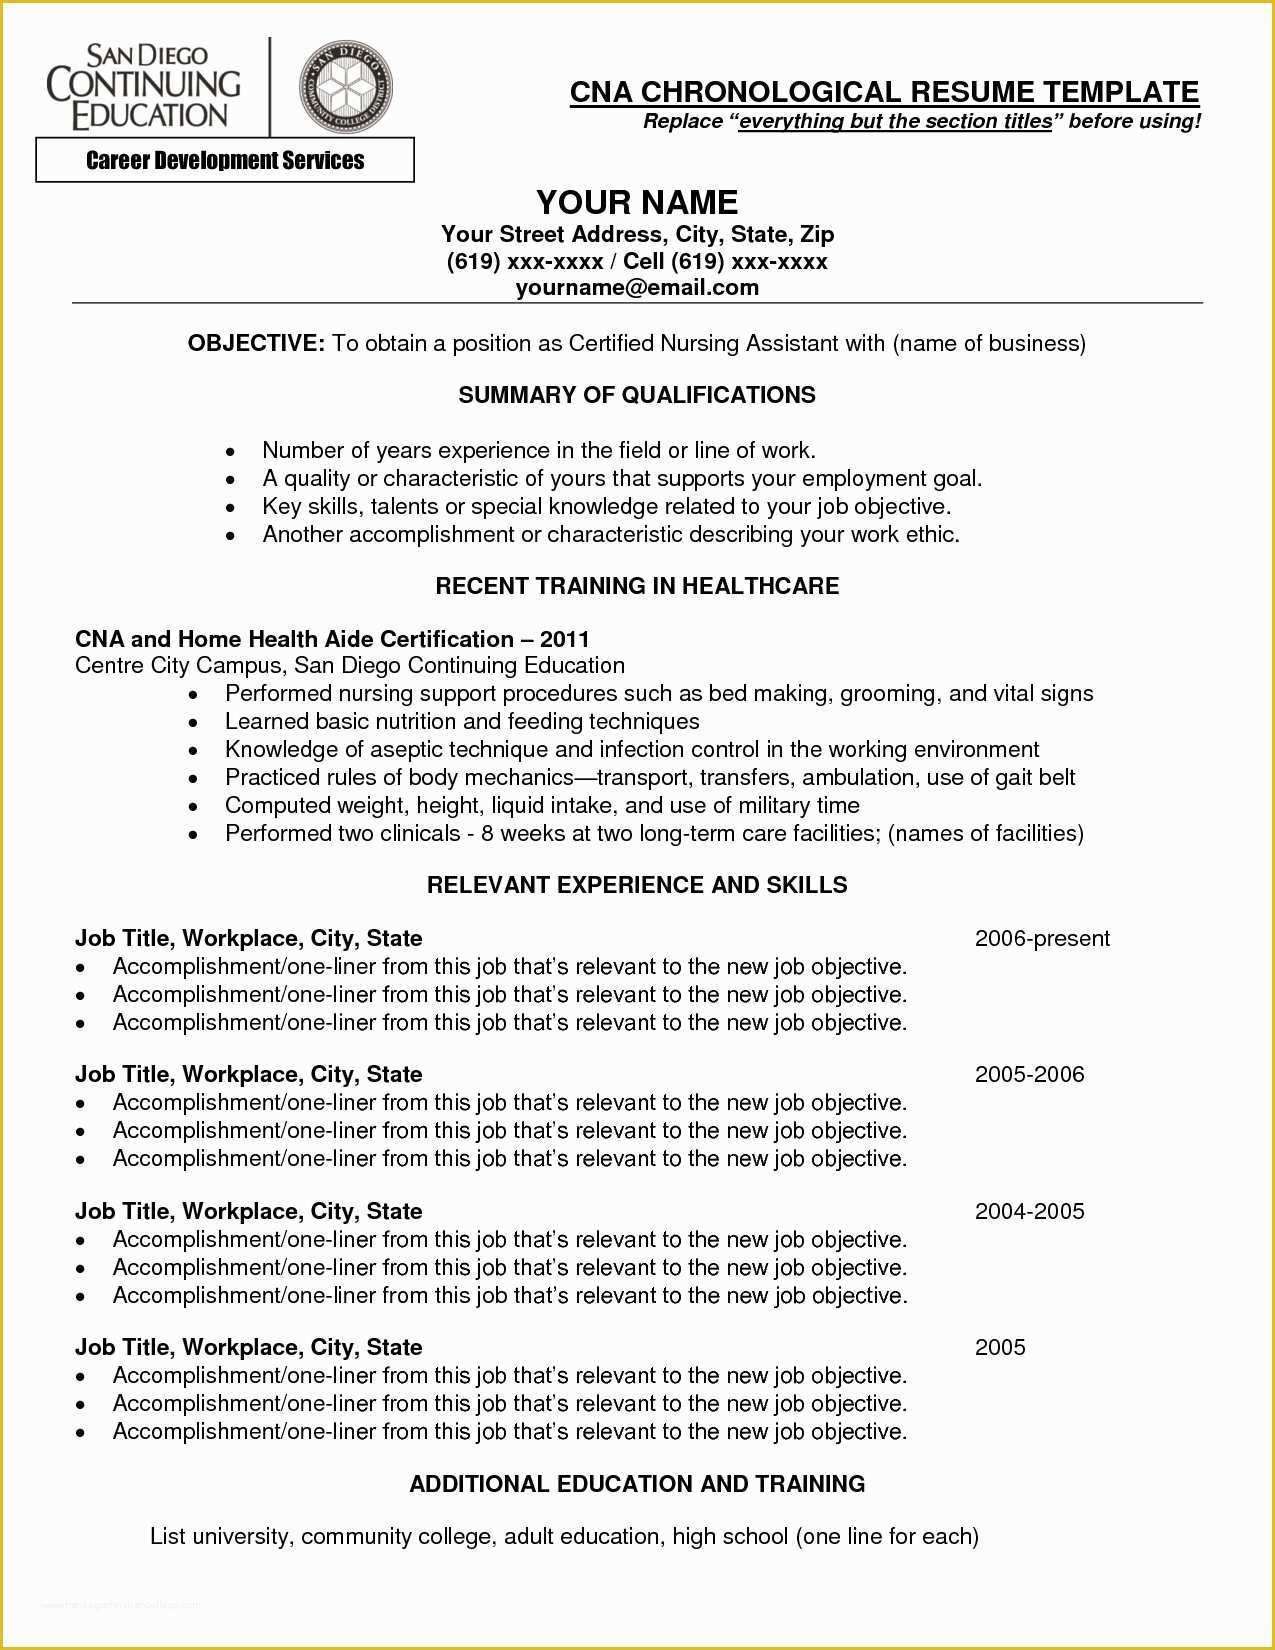 Free Resume Templates for Certified Nursing assistant Of Free Resume Templates for Certified Nursing assistant